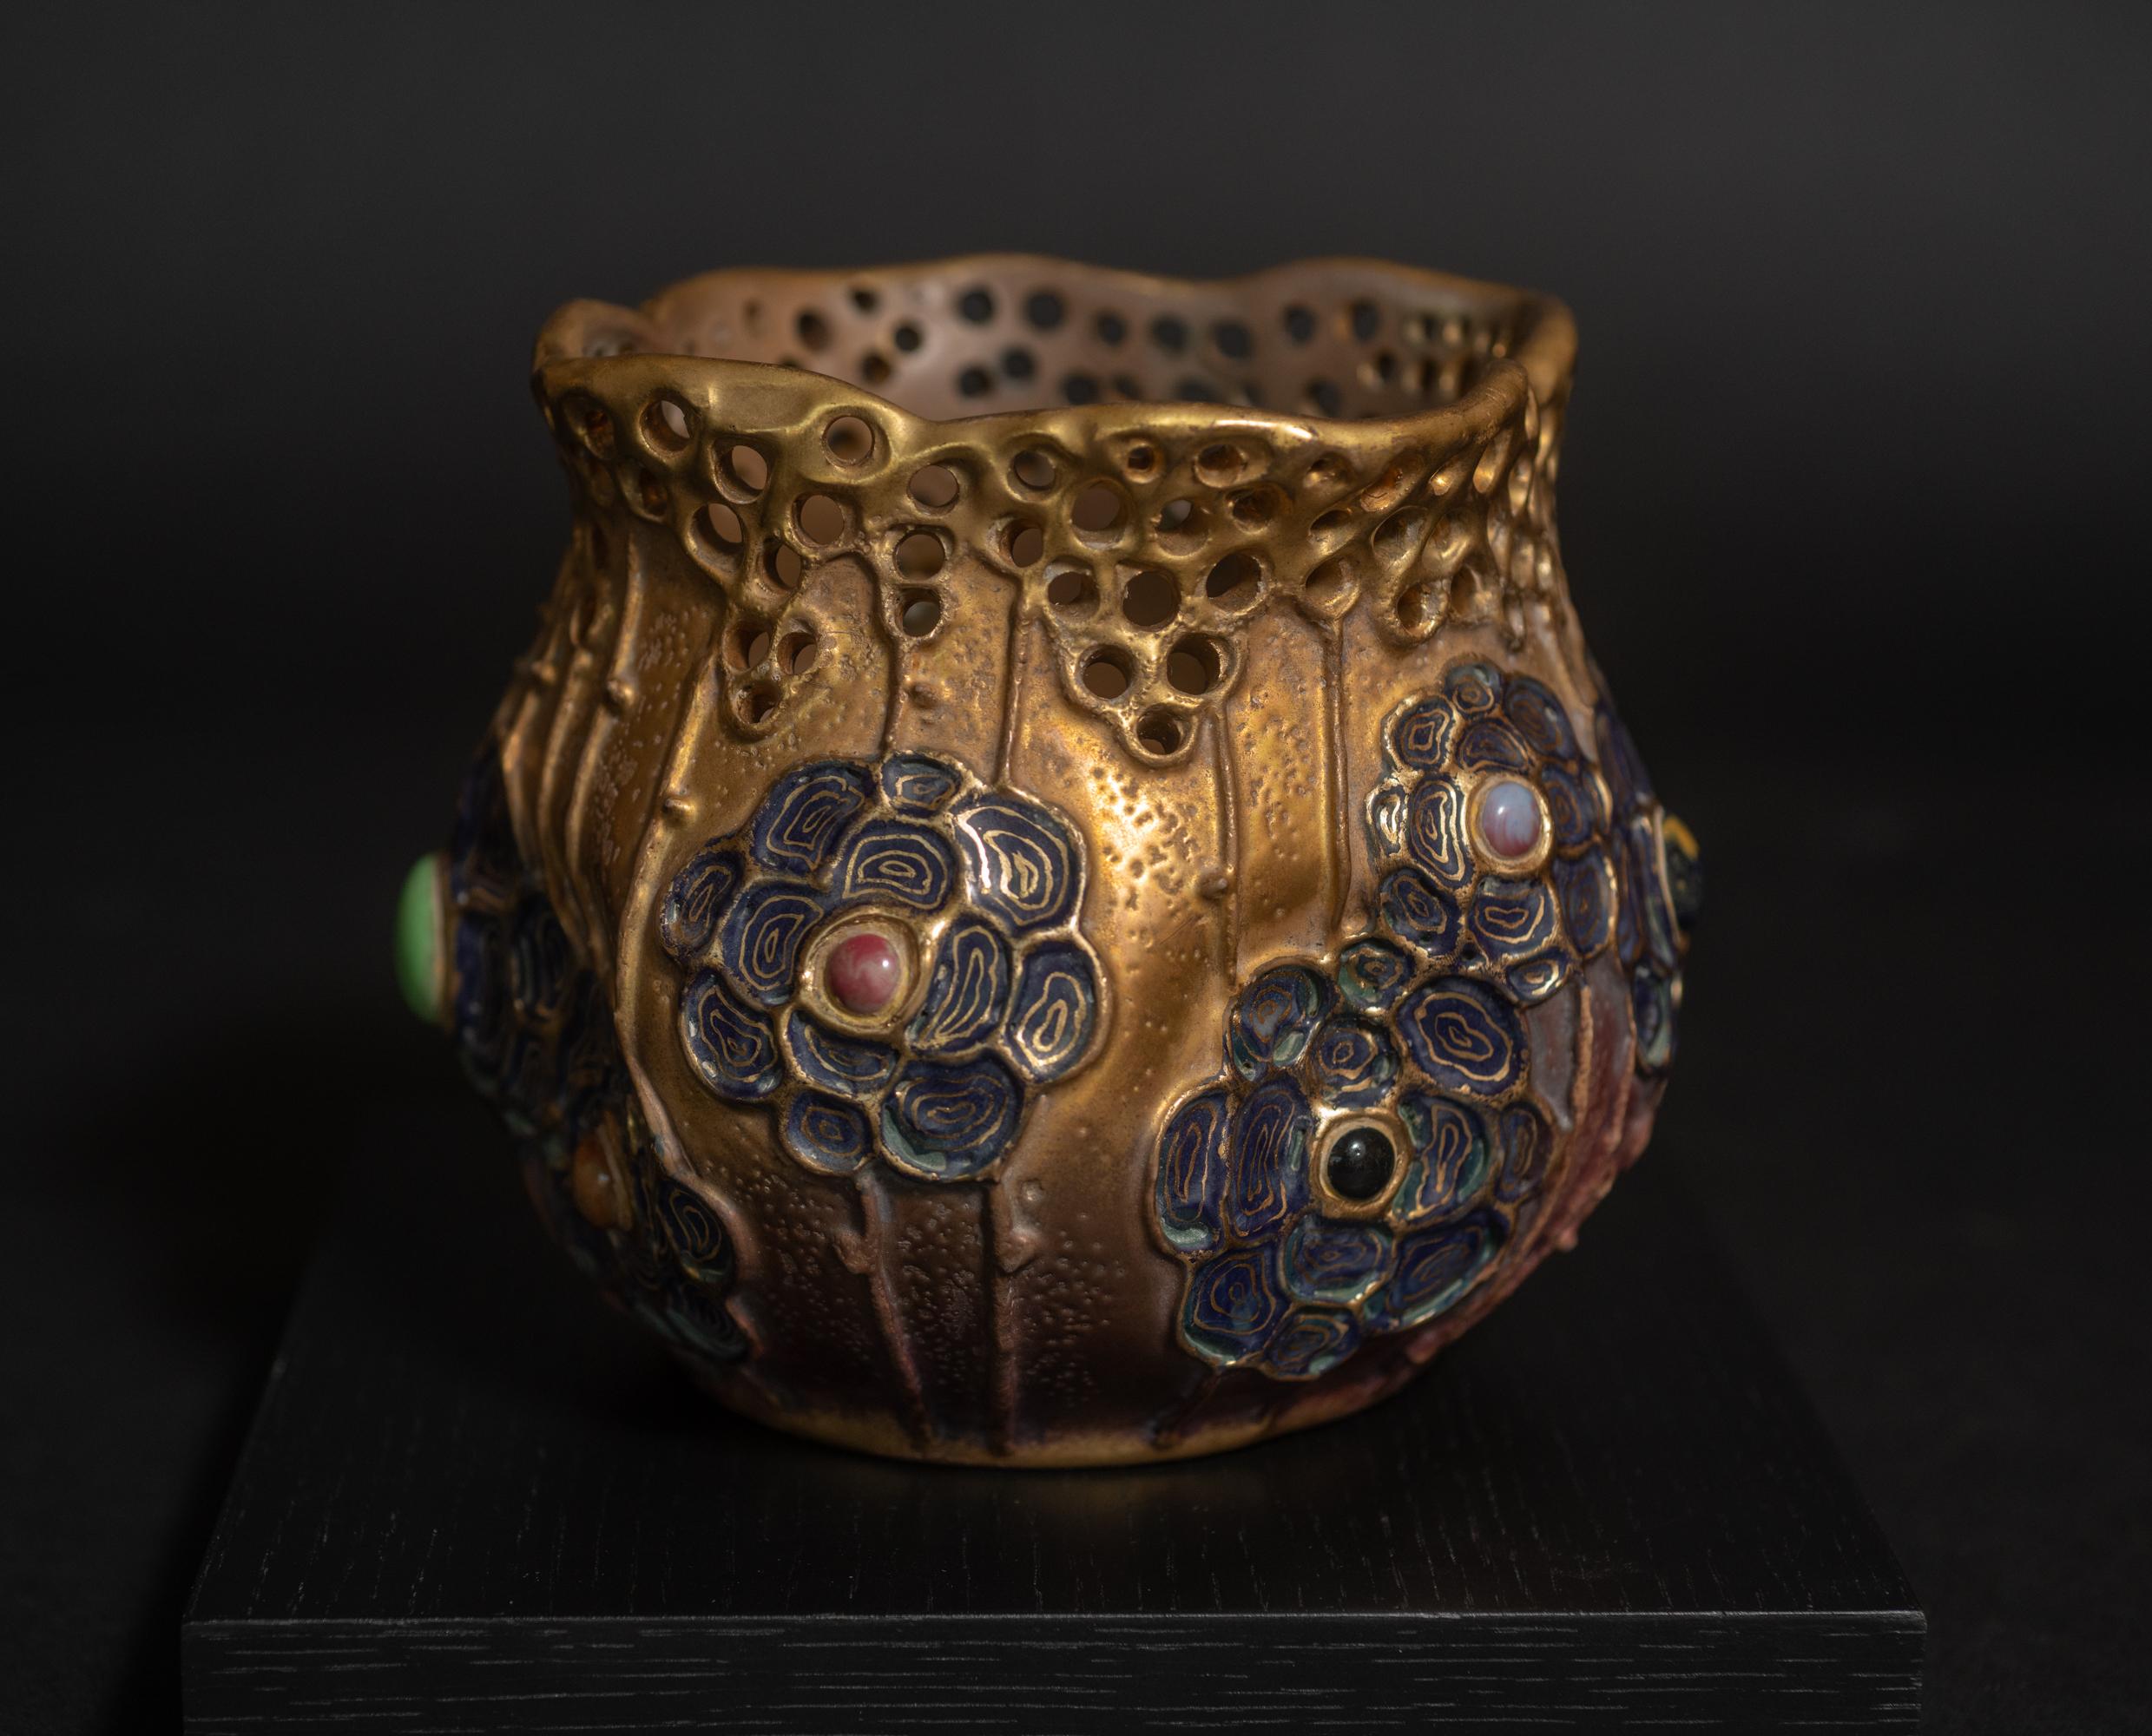 Model #3364

Riessner, Stellmacher and Kessel (RSt&K), consistently marked pieces with the tradename “Amphora” by the late 1890s and became known by that name. The Amphora pottery factory was located in Turn-Teplitz, Austria. By the mid-19th